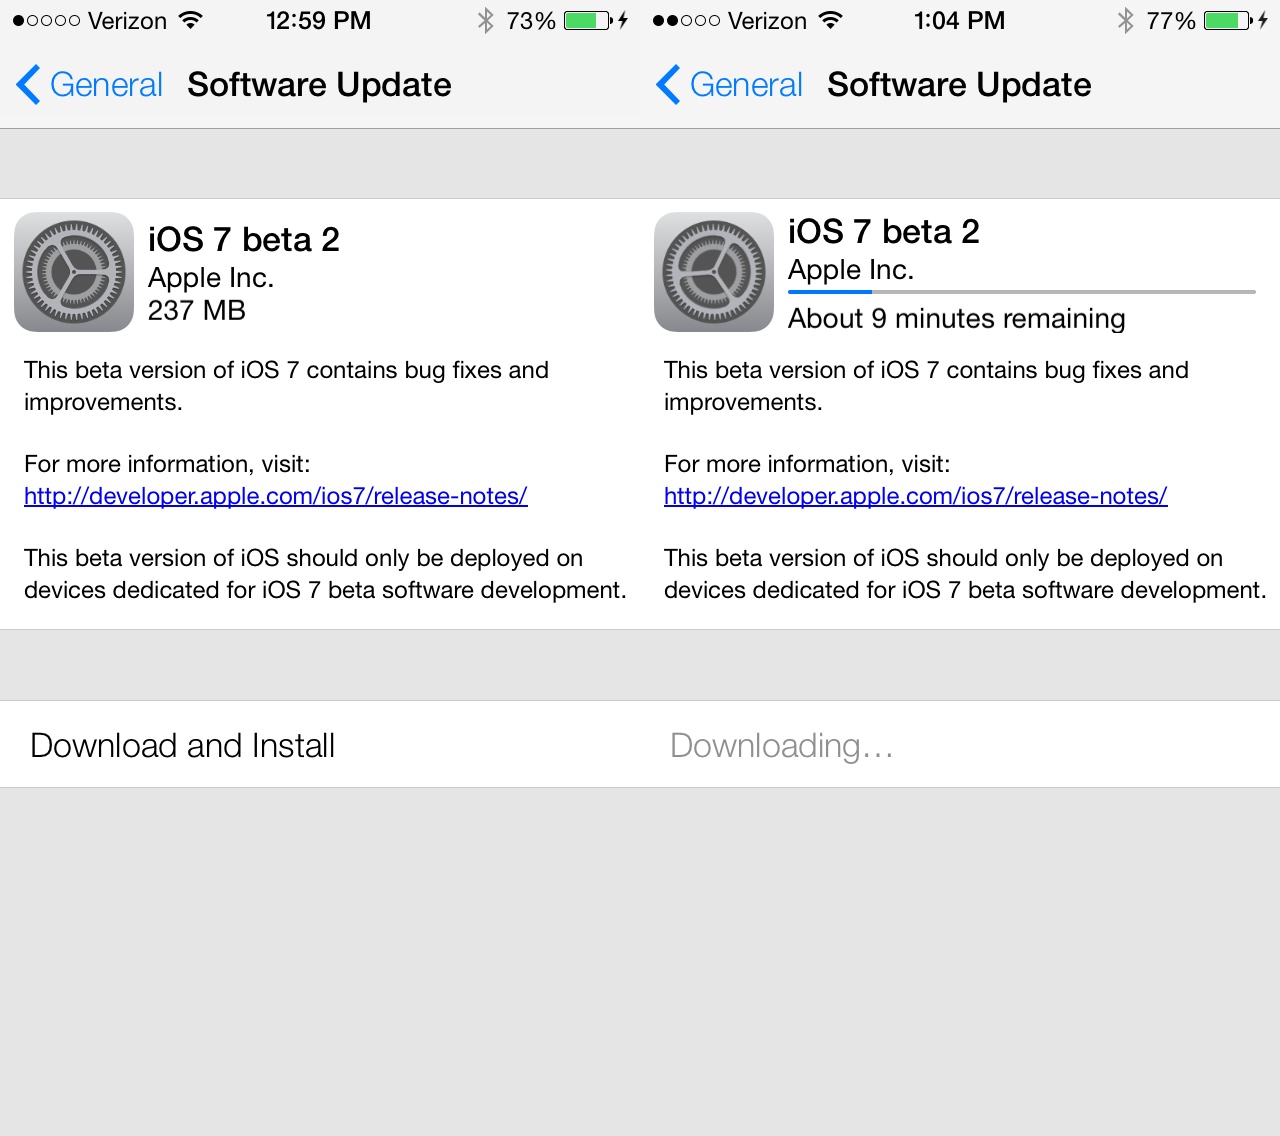 The iOS 7 beta 2 download is available now with un-announced features and fixes.